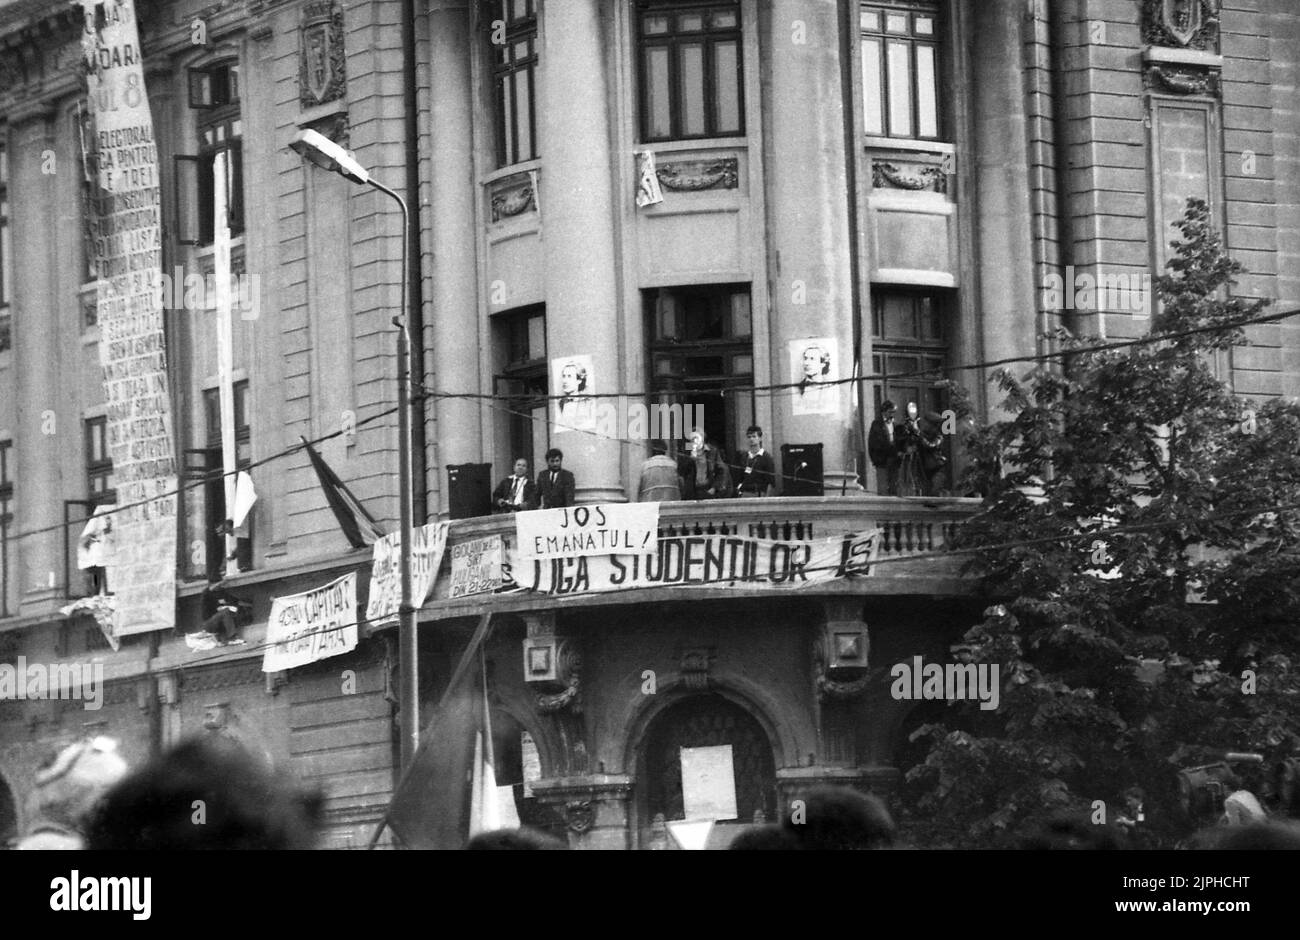 Bucharest, Romania, April 1990. 'Golaniada', a major anti-communism protest in the University Square following the Romanian Revolution of 1989. People would gather daily to protest the ex-communists that grabbed the power after the Revolution. The balcony of the University building became 'the platform for democracy', used to address the crowd. Stock Photo